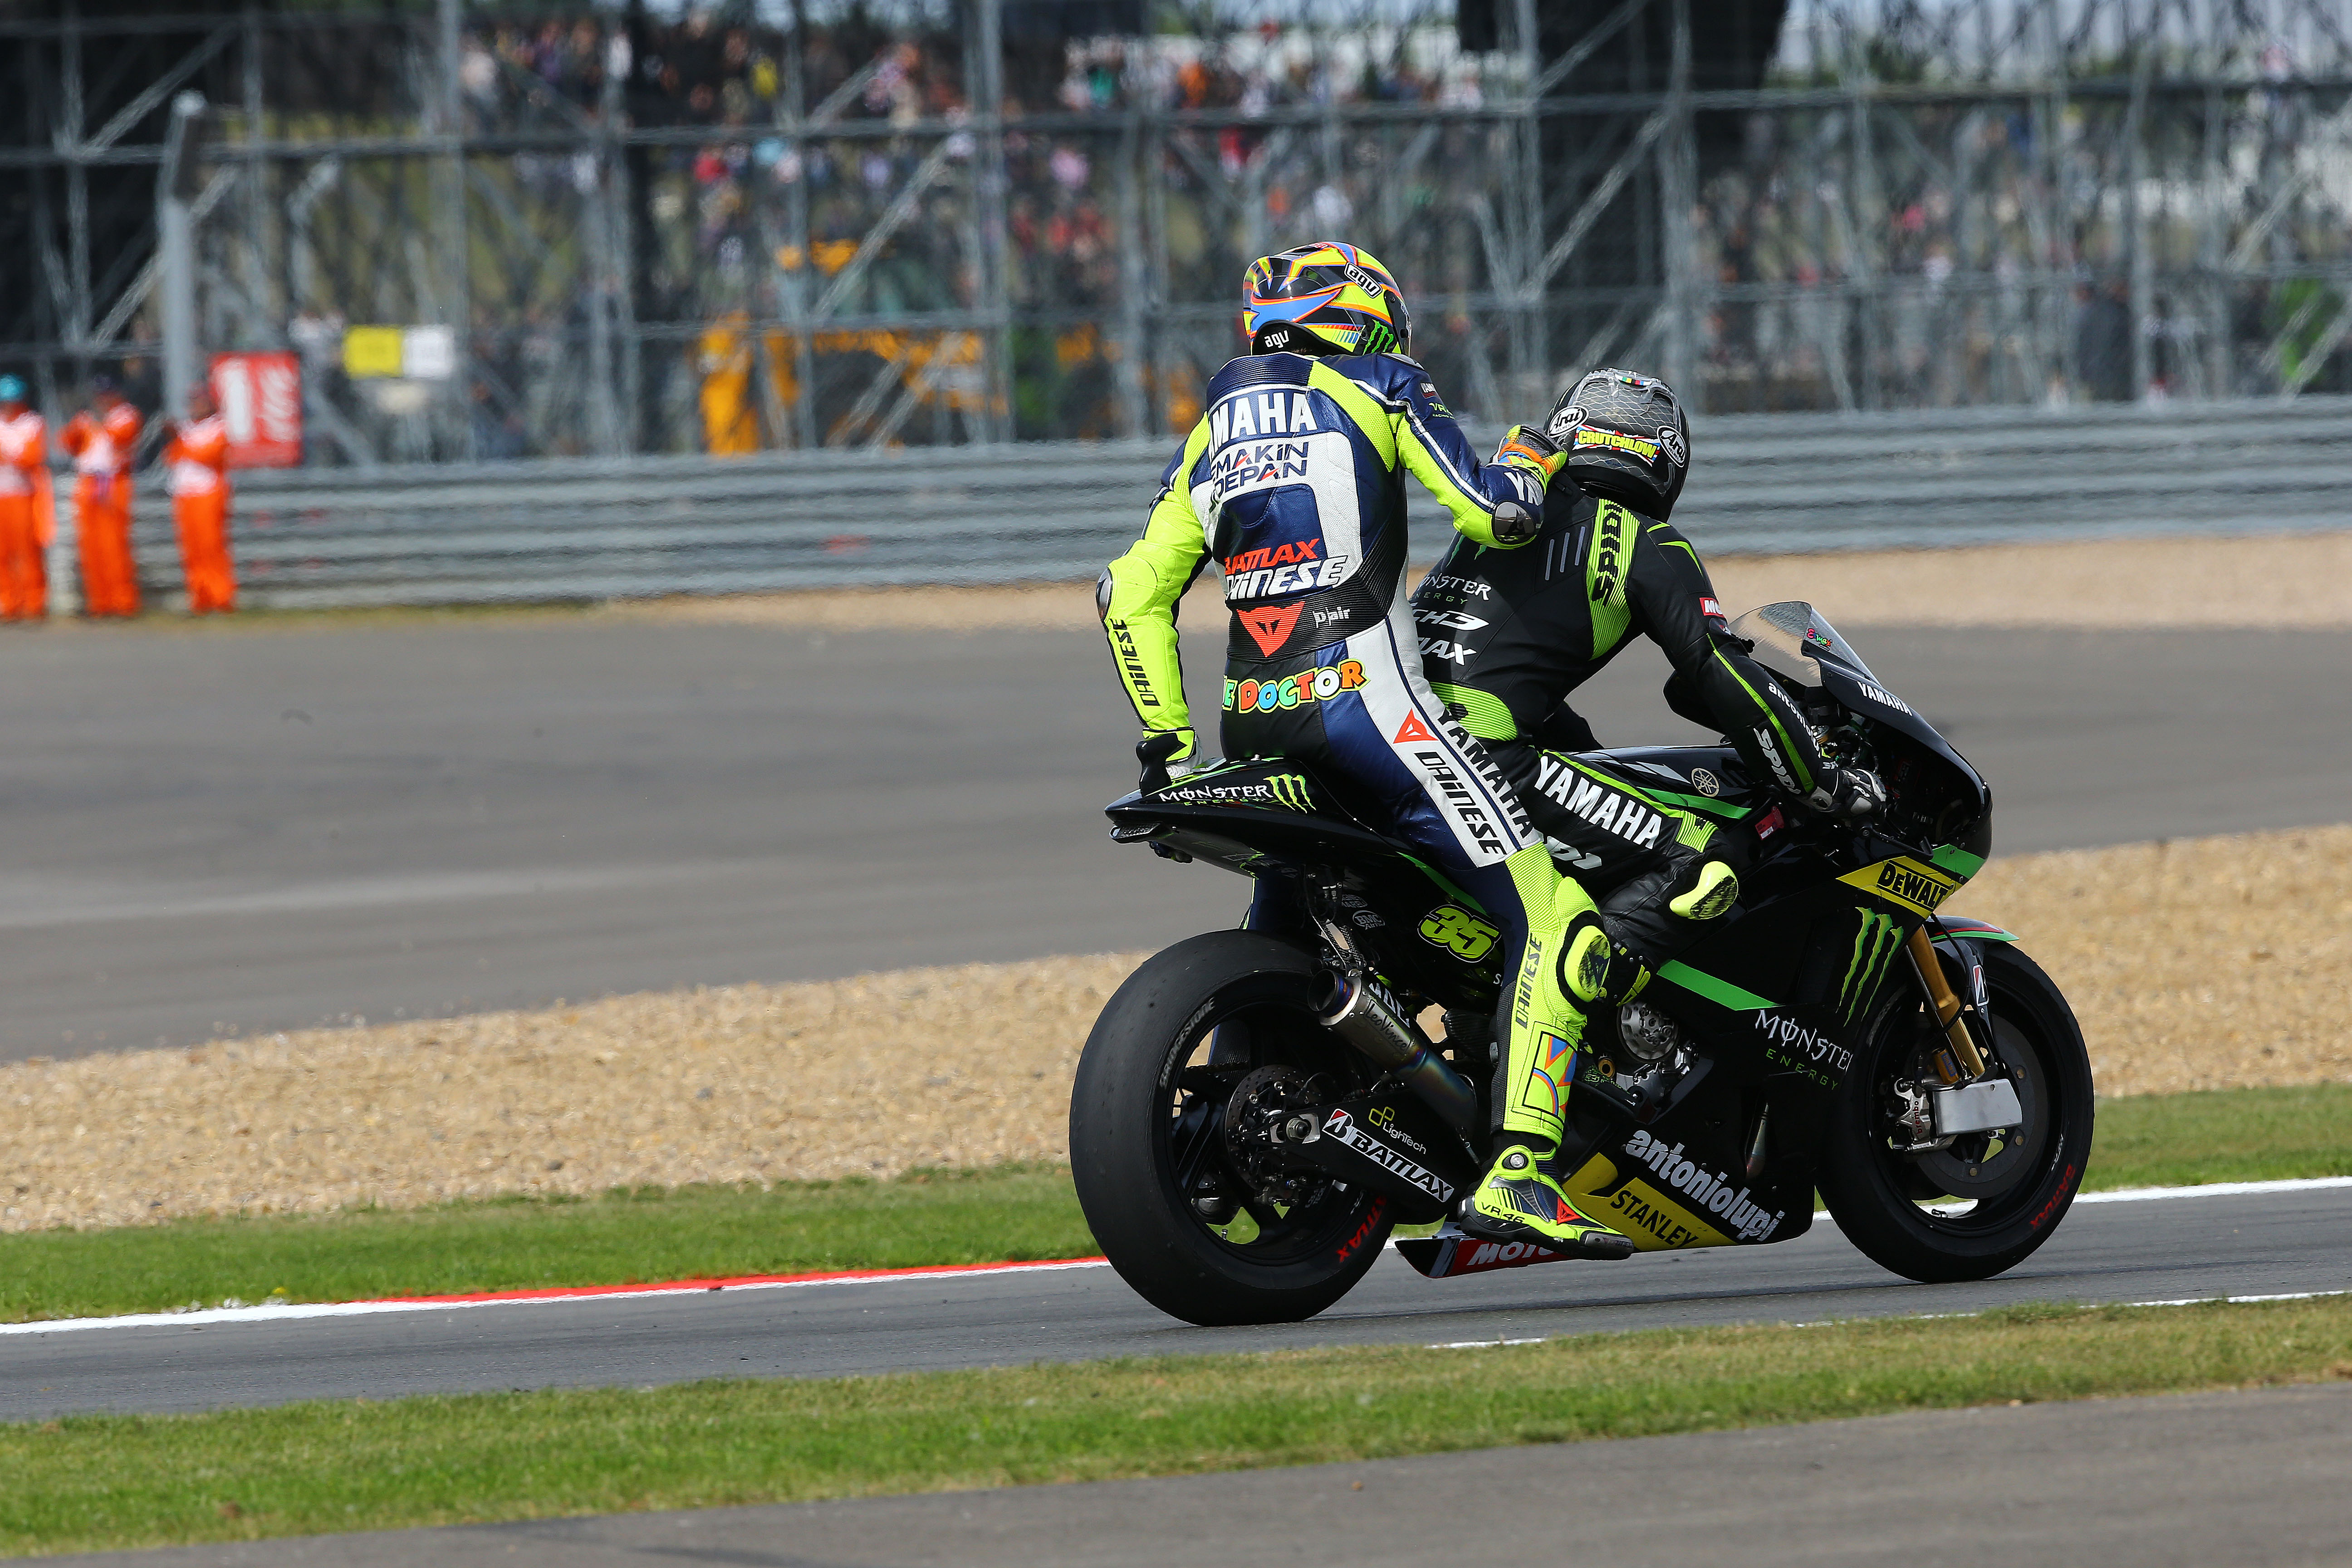 Disappointing weekend for Crutchlow